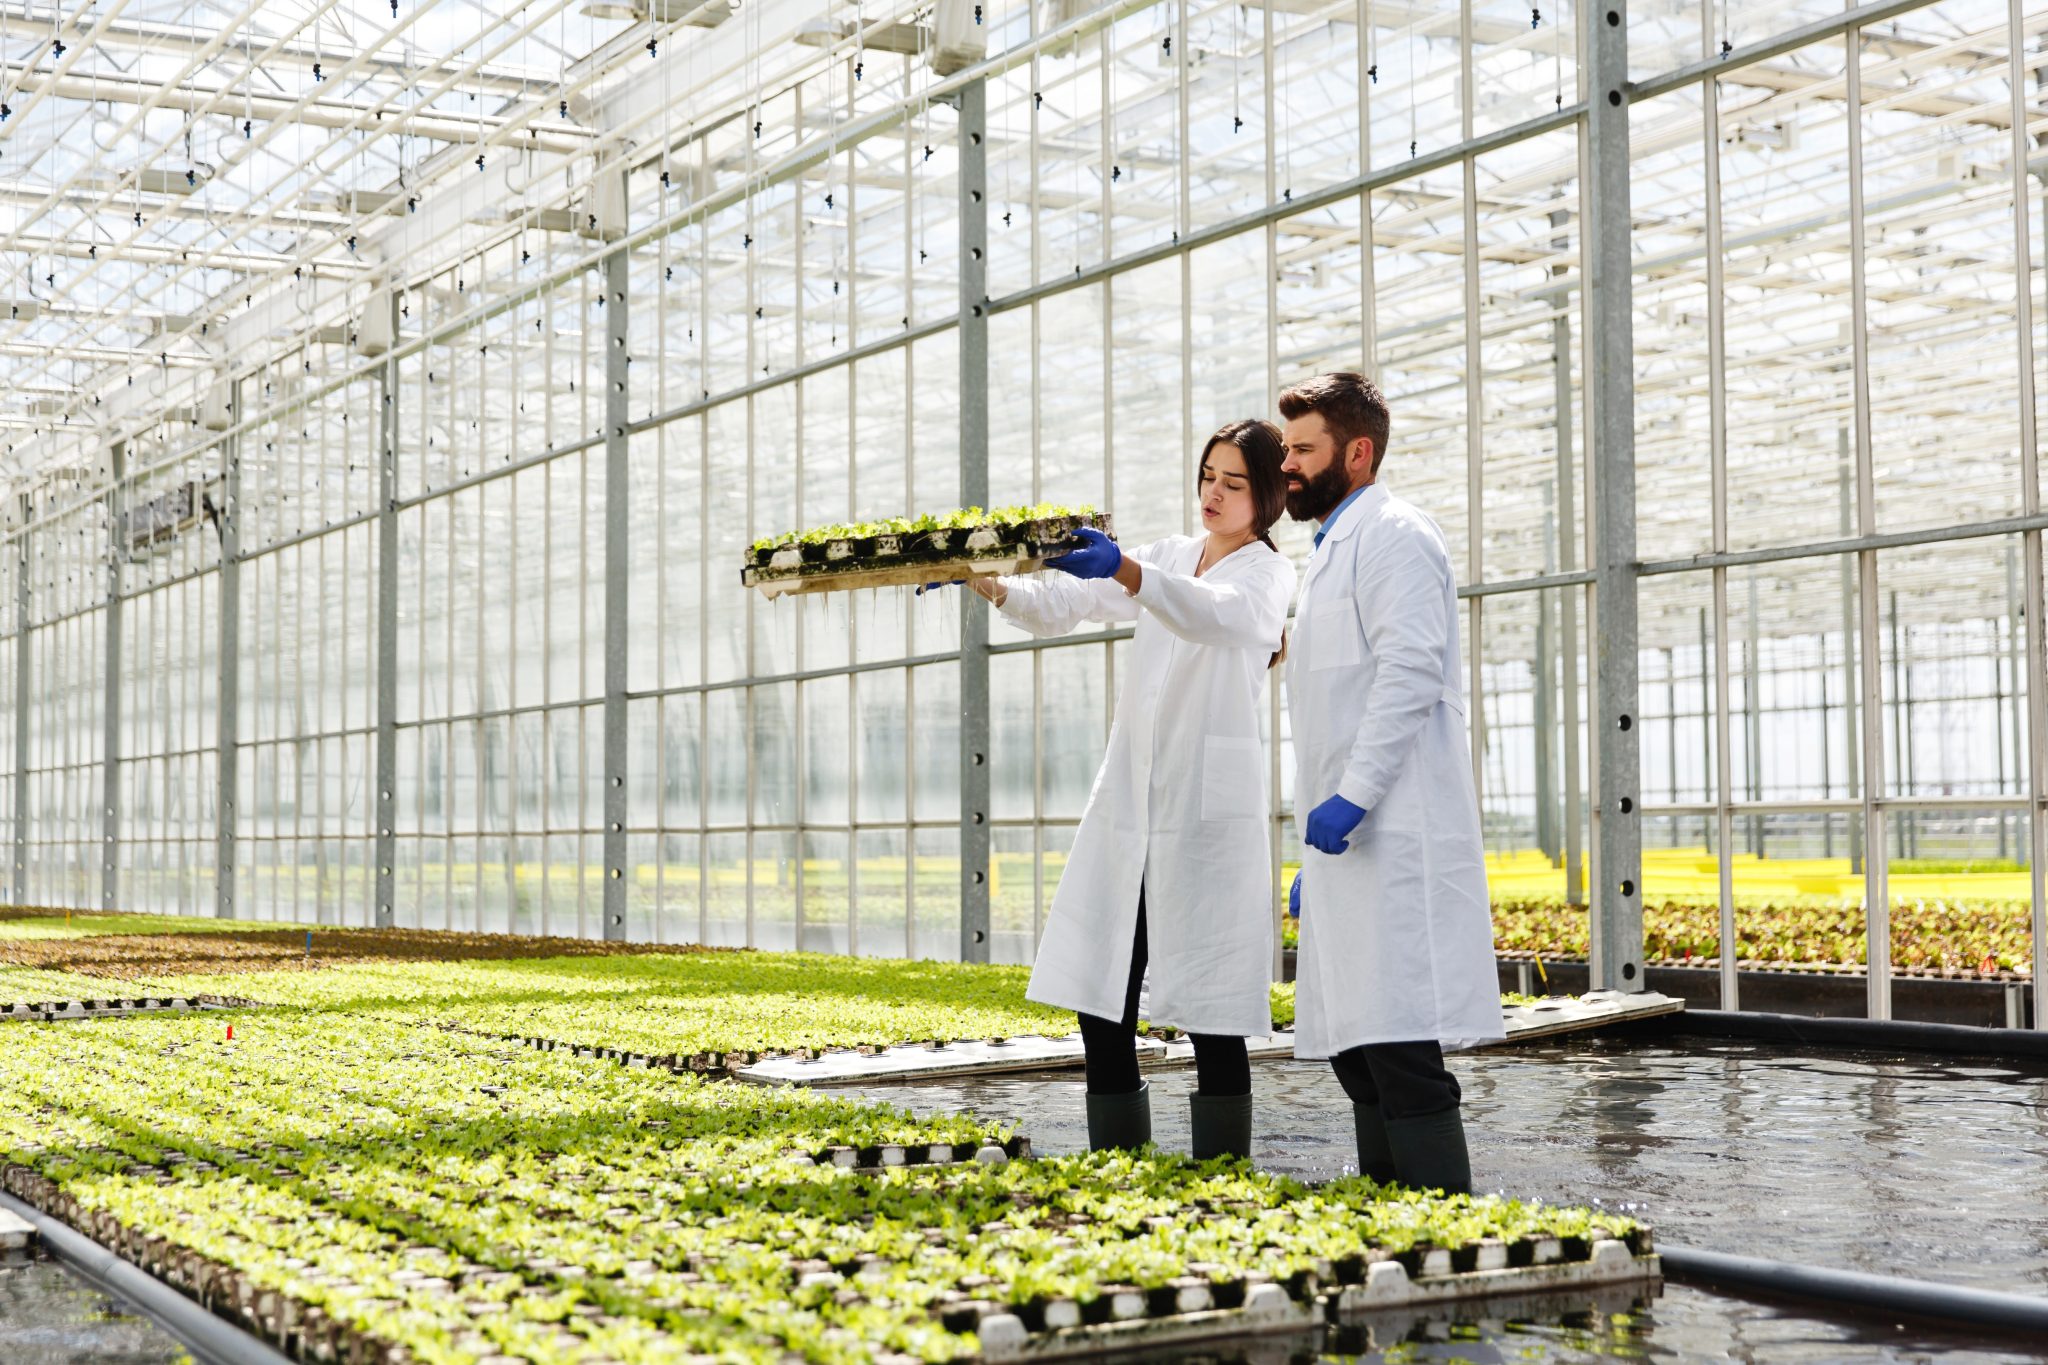 man and woman in laboratory robes work with green plants in a gr